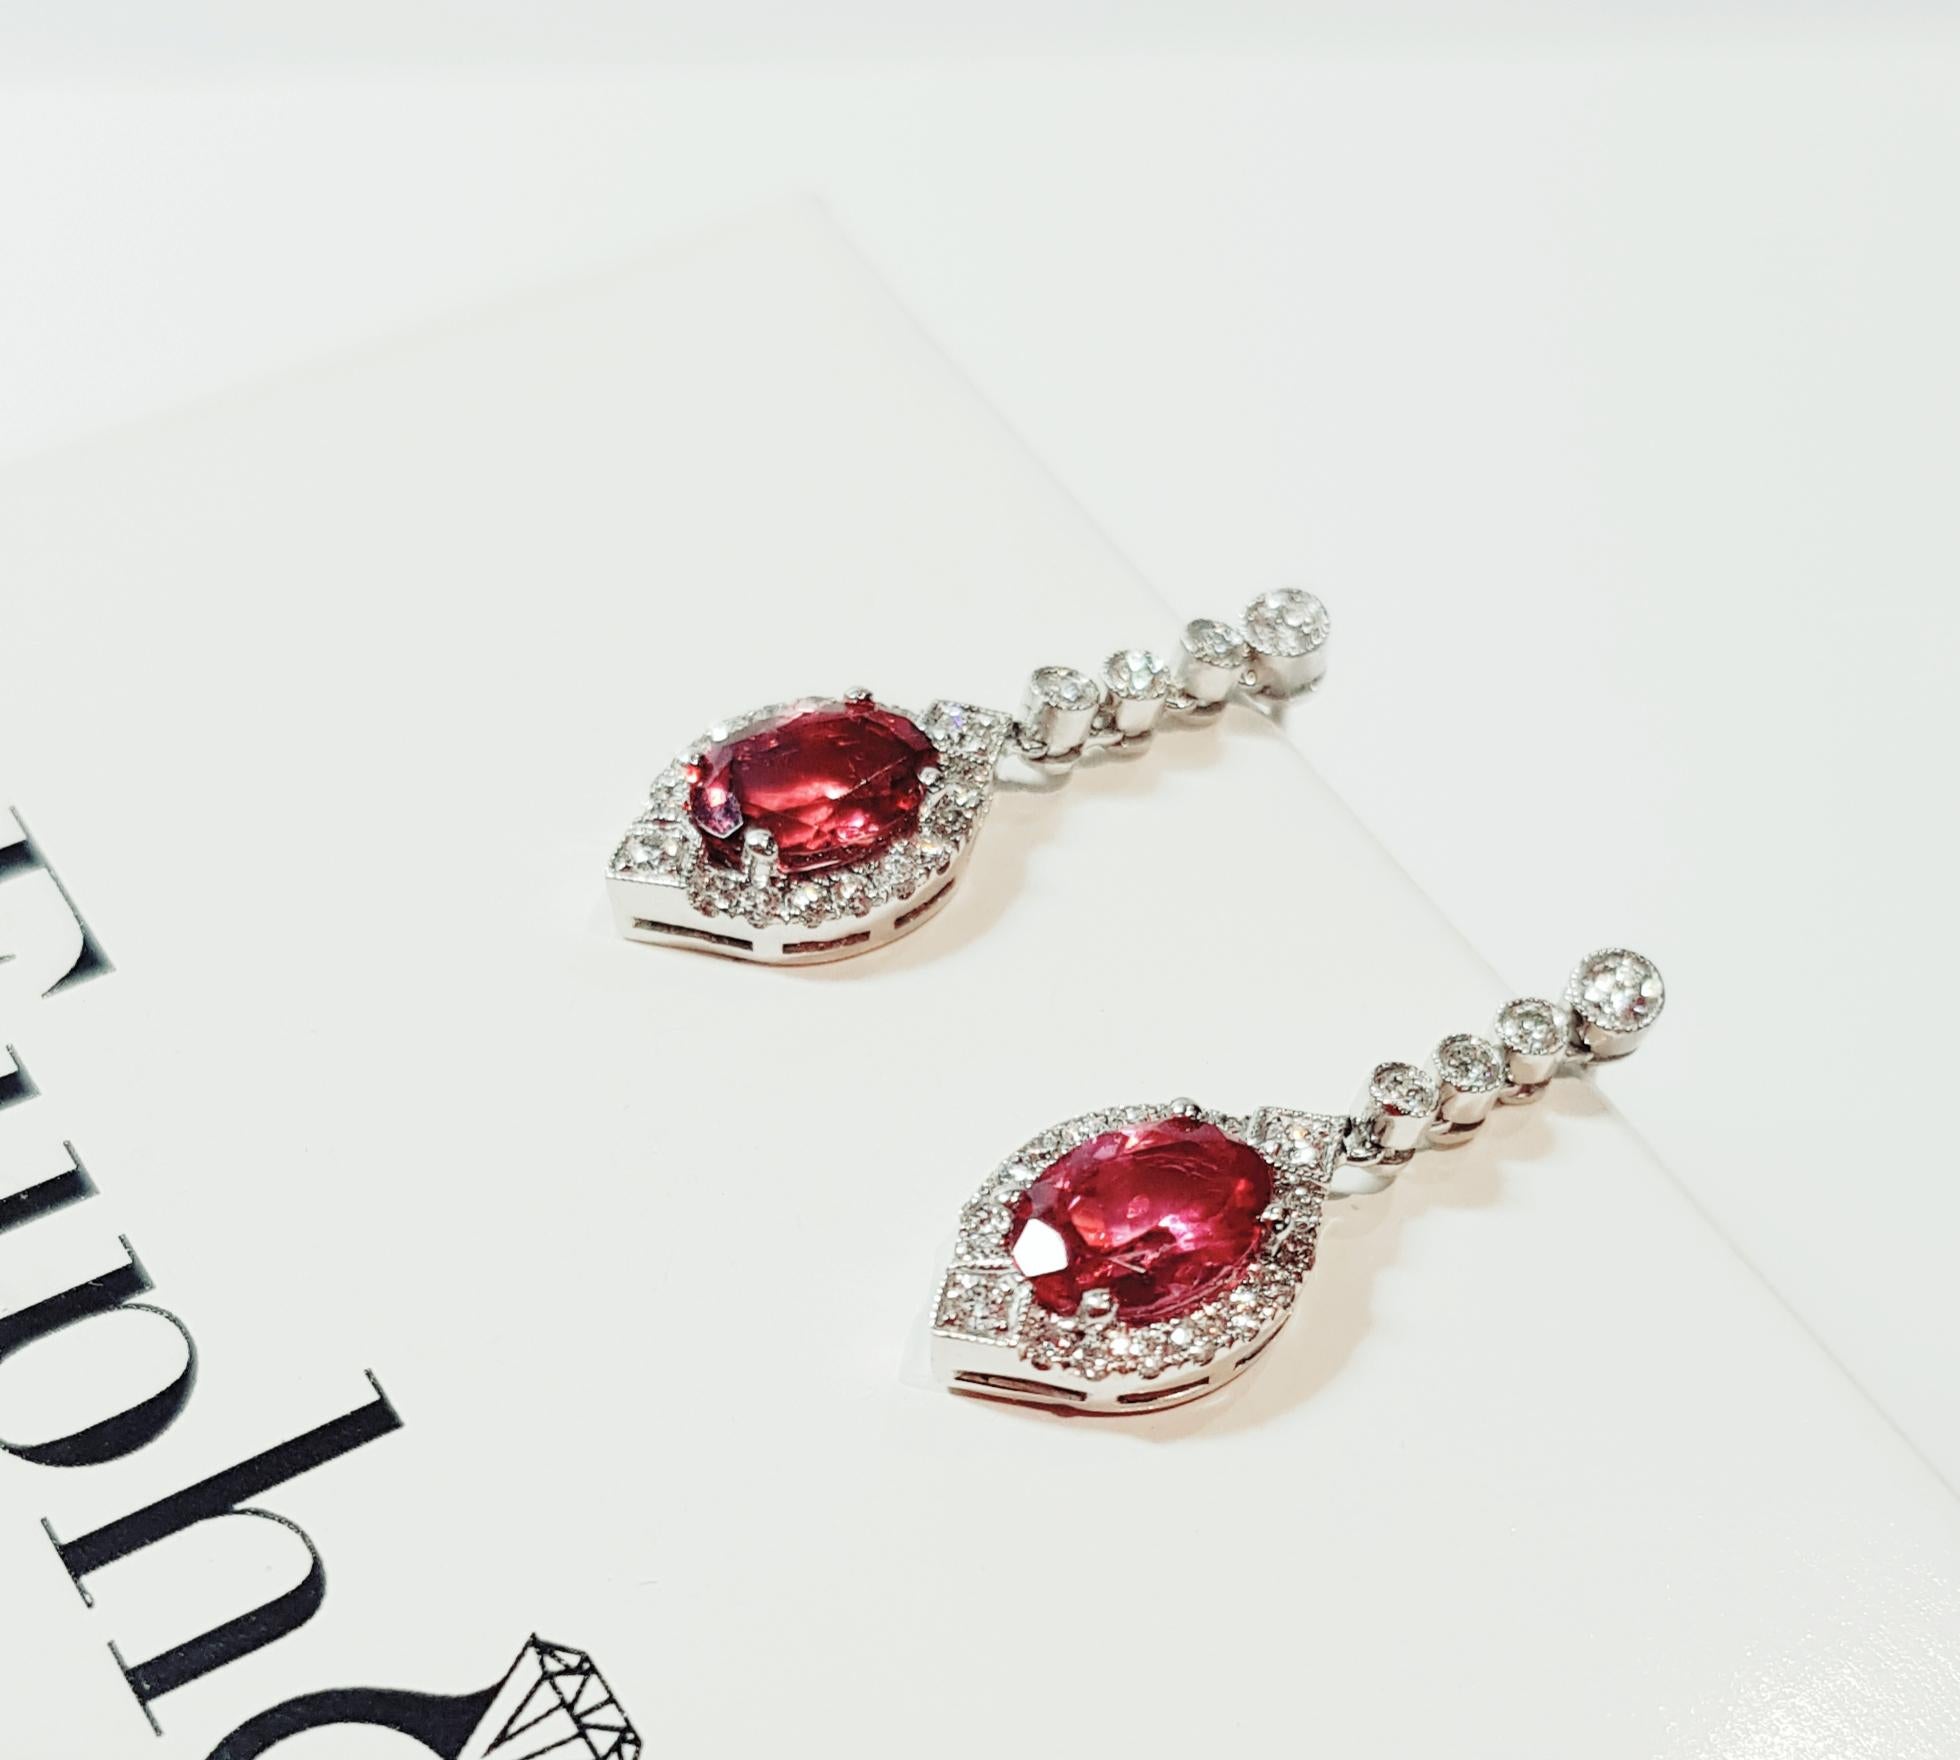 Handcrafted 18ct white gold earrings set with 2 x oval imperial red vibrant Spinel AAA grade and collection quality round brilliant cut diamonds.   
Euphoria Jewels only embraces rare ,exotic , intense gemstone colours that appeal to the inquisitive